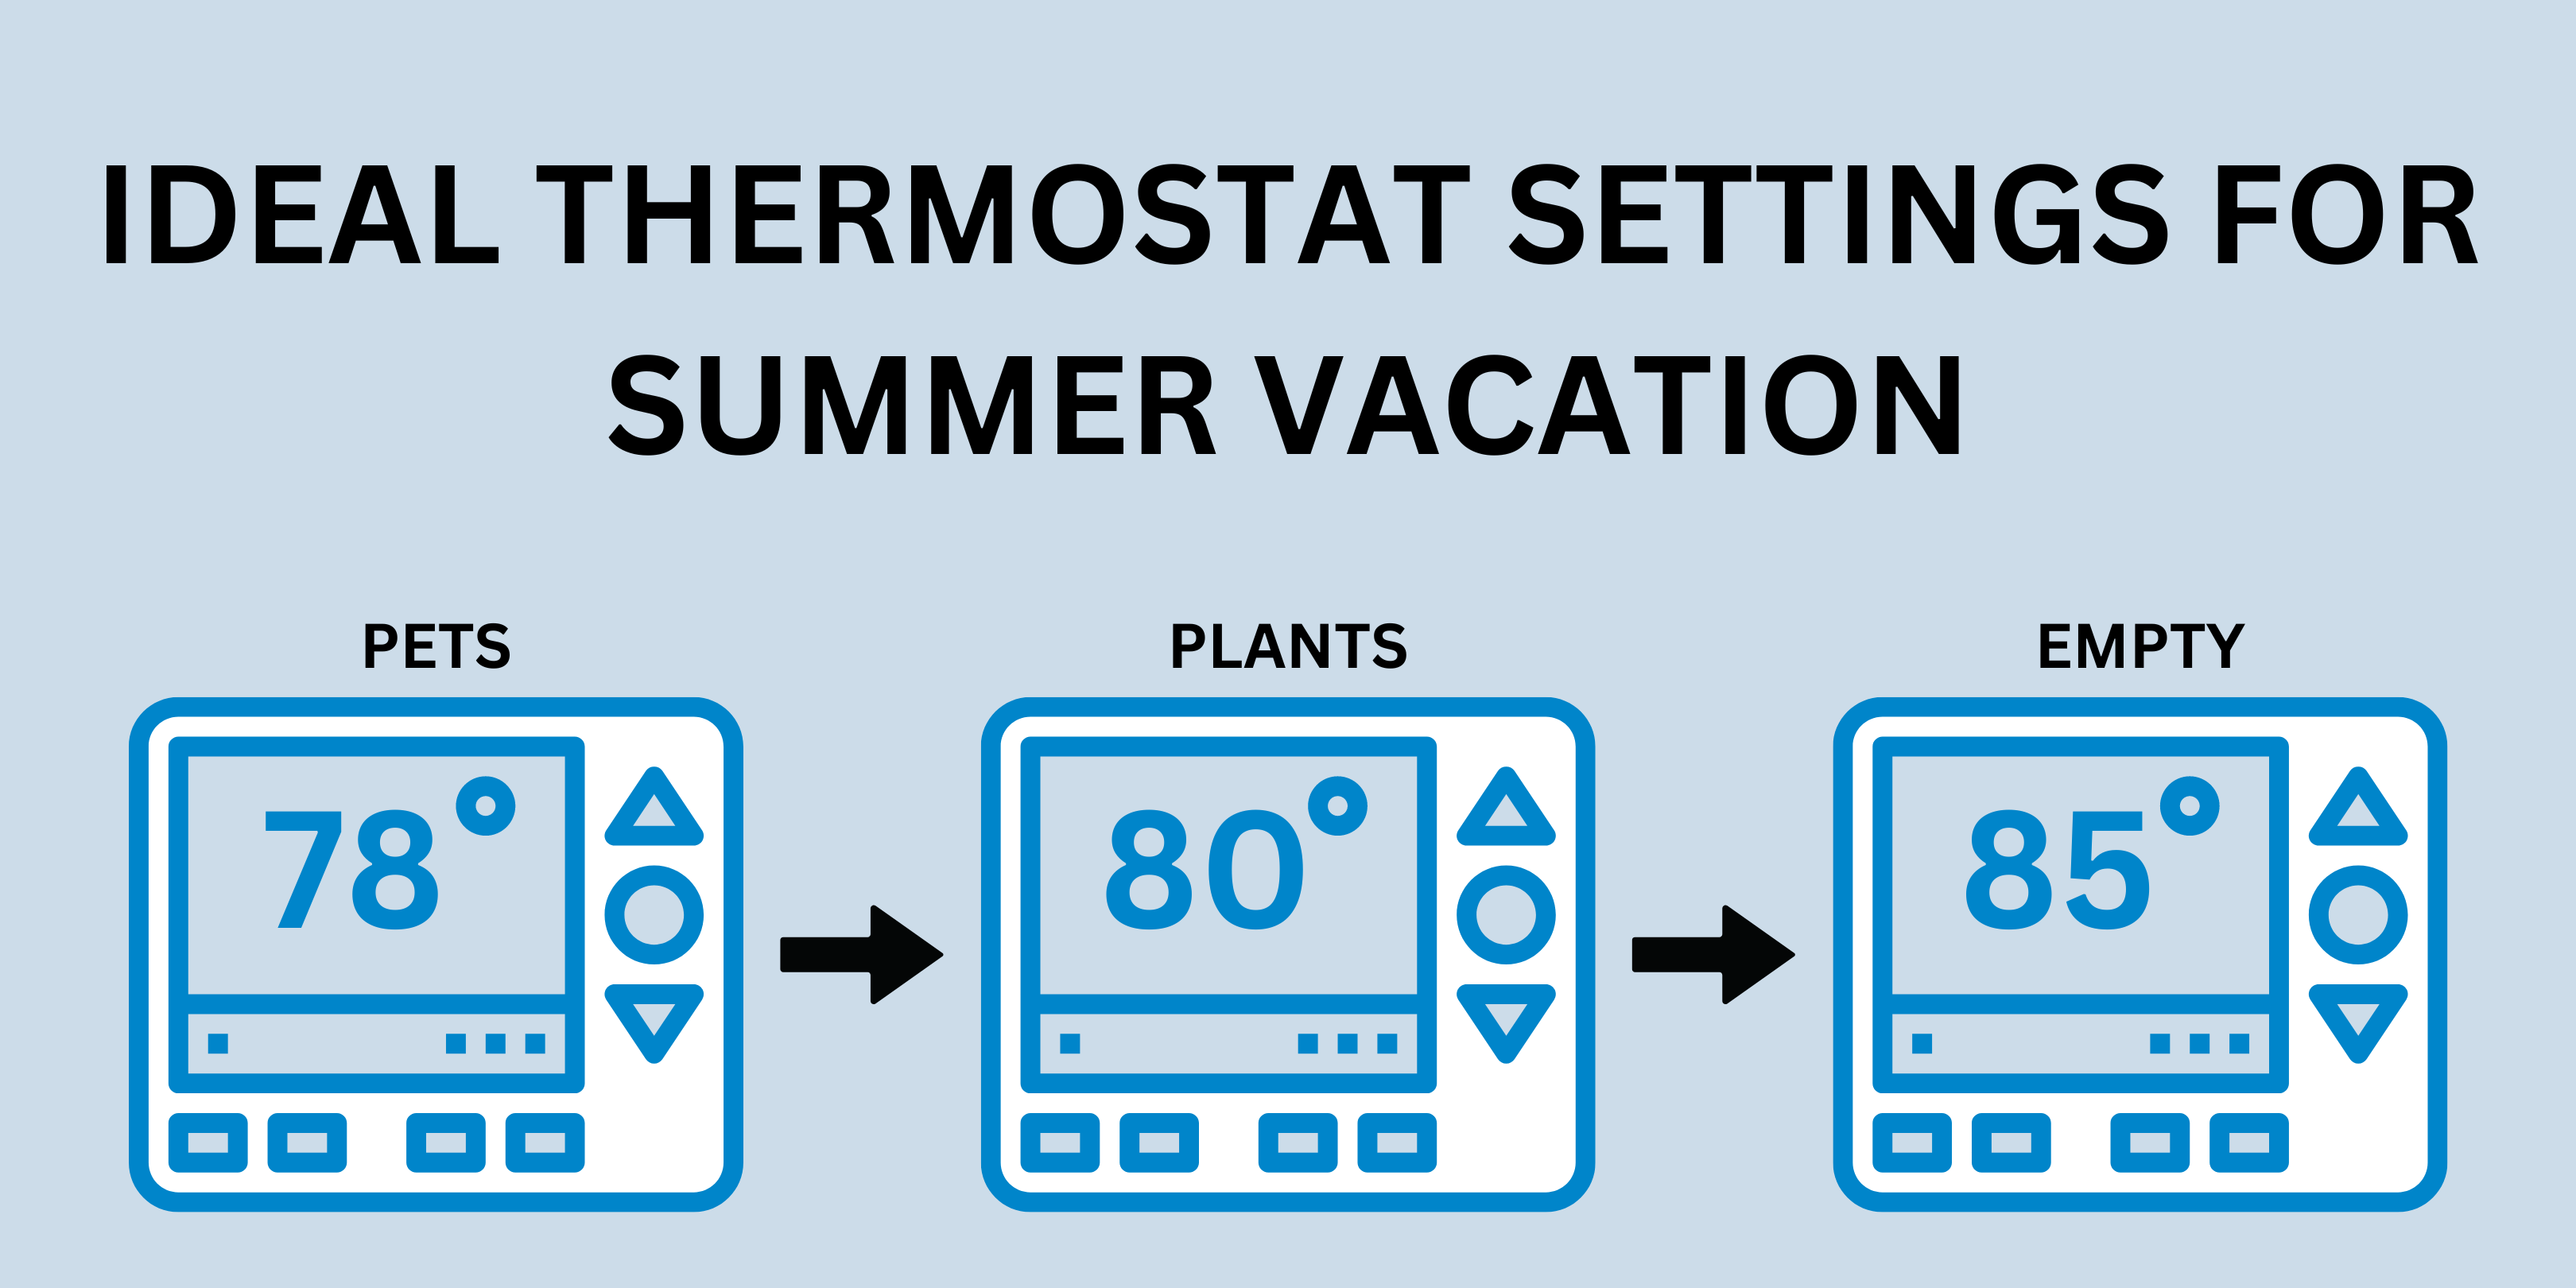 Graphic says Ideal Thermostat Settings for Summer Vacation, then shows thermostats with the temperatures 75 for plants, 80 for pets, and 85 for empty